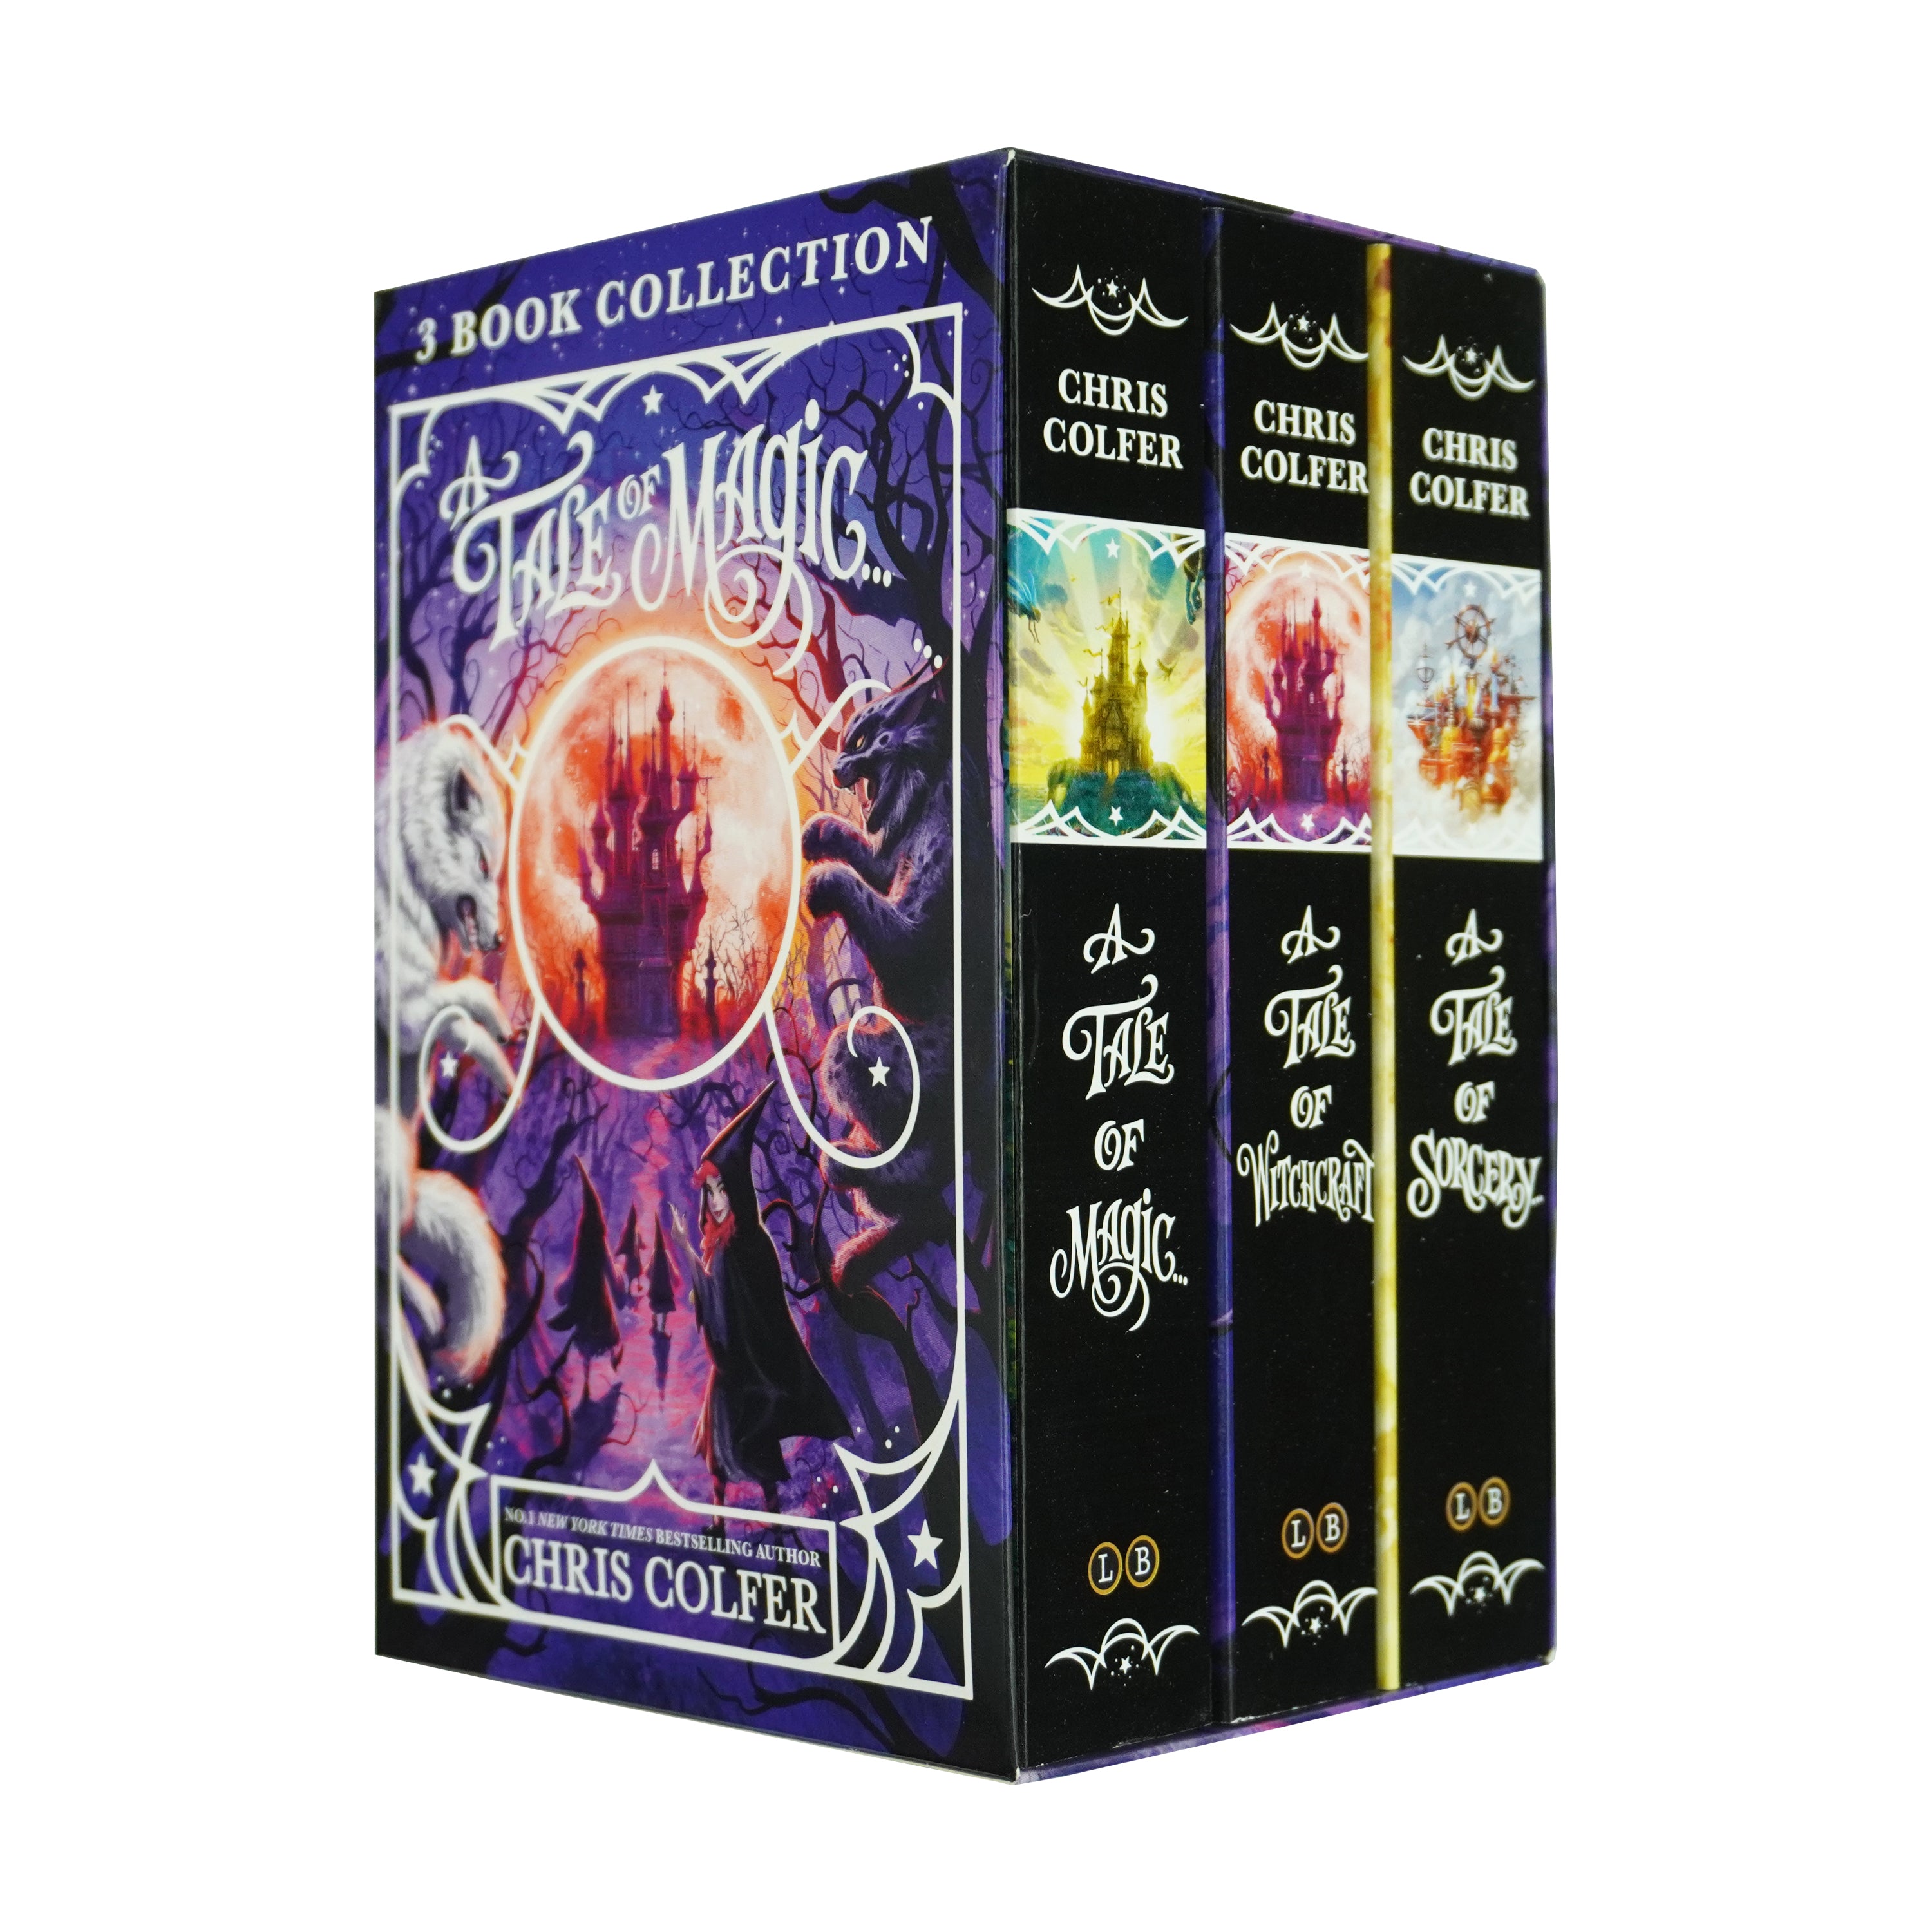 A Tale of Magic Series By Chris Colfer 3 Books Collection Box Set - Ages 9-11 - Paperback